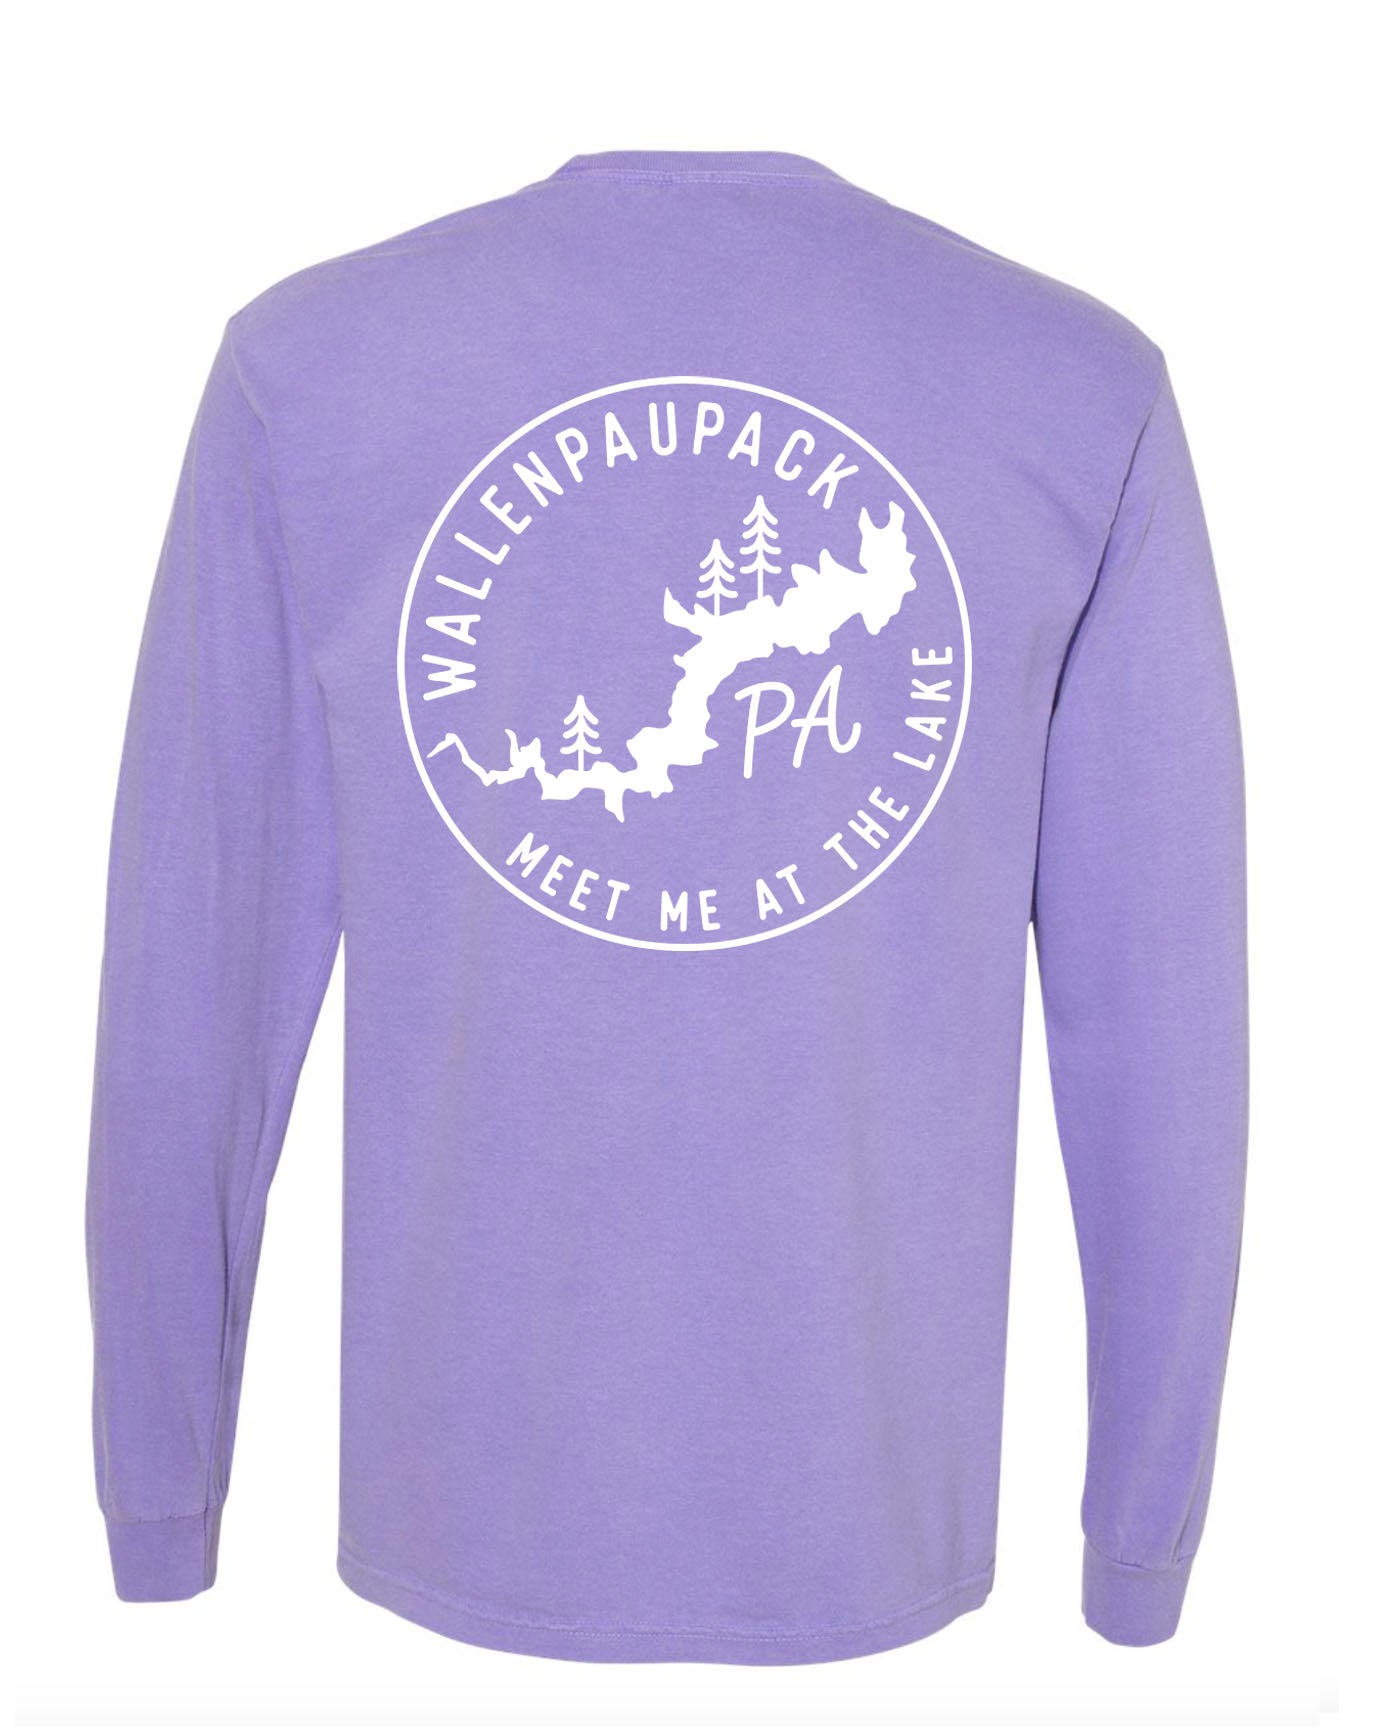 Limited Edition SPRING Colors - Long Sleeve Shirt